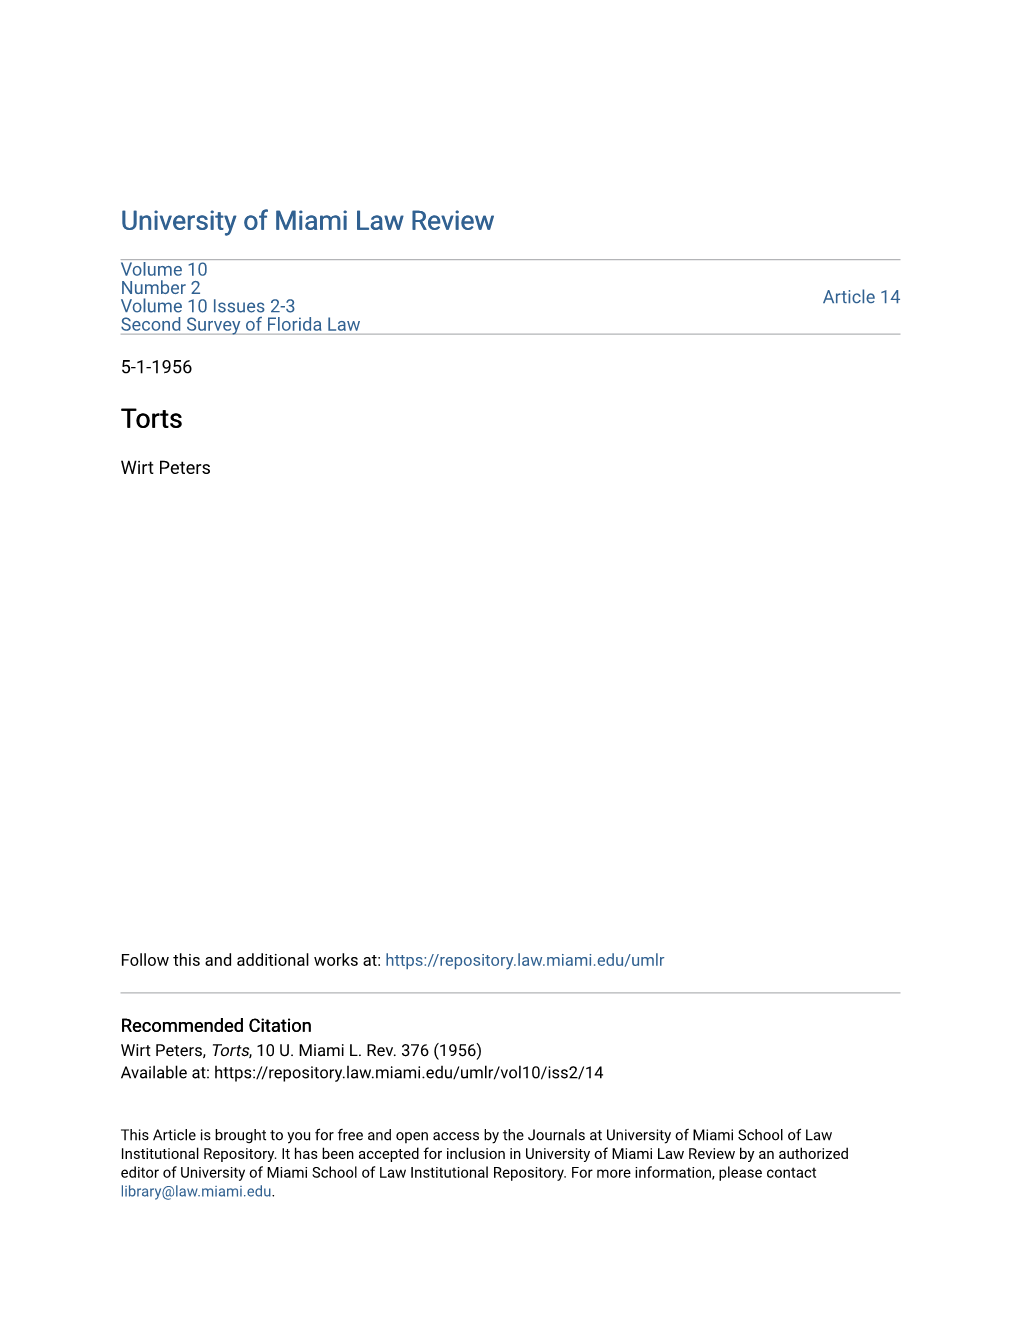 University of Miami Law Review Torts